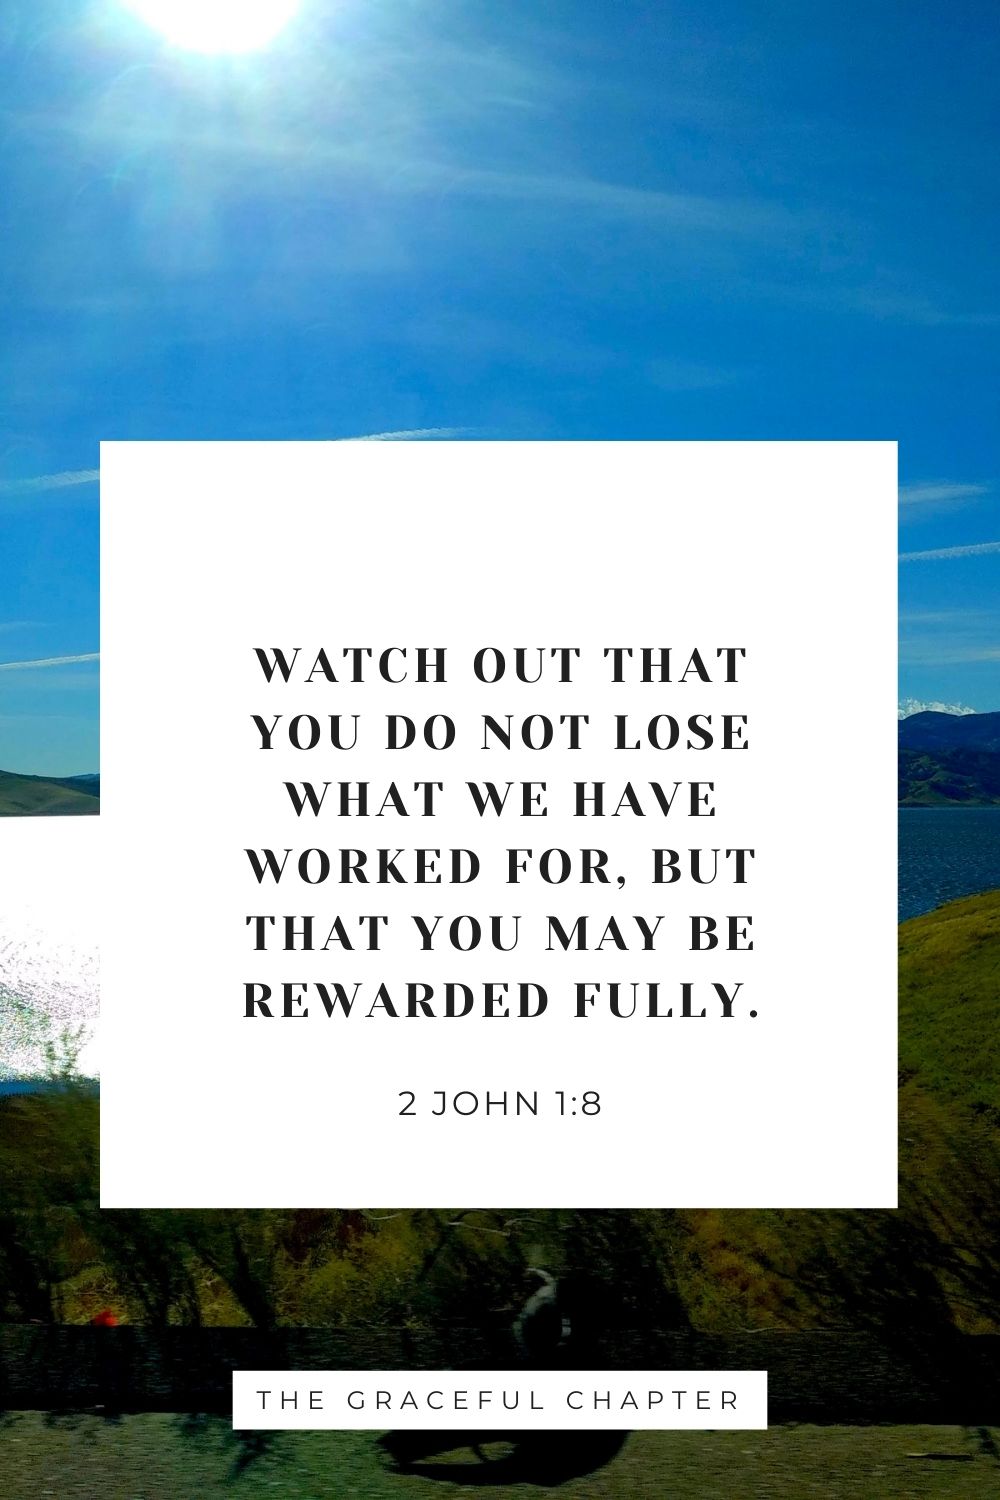 Watch out that you do not lose what we have worked for, but that you may be rewarded fully. 2 John 1:8